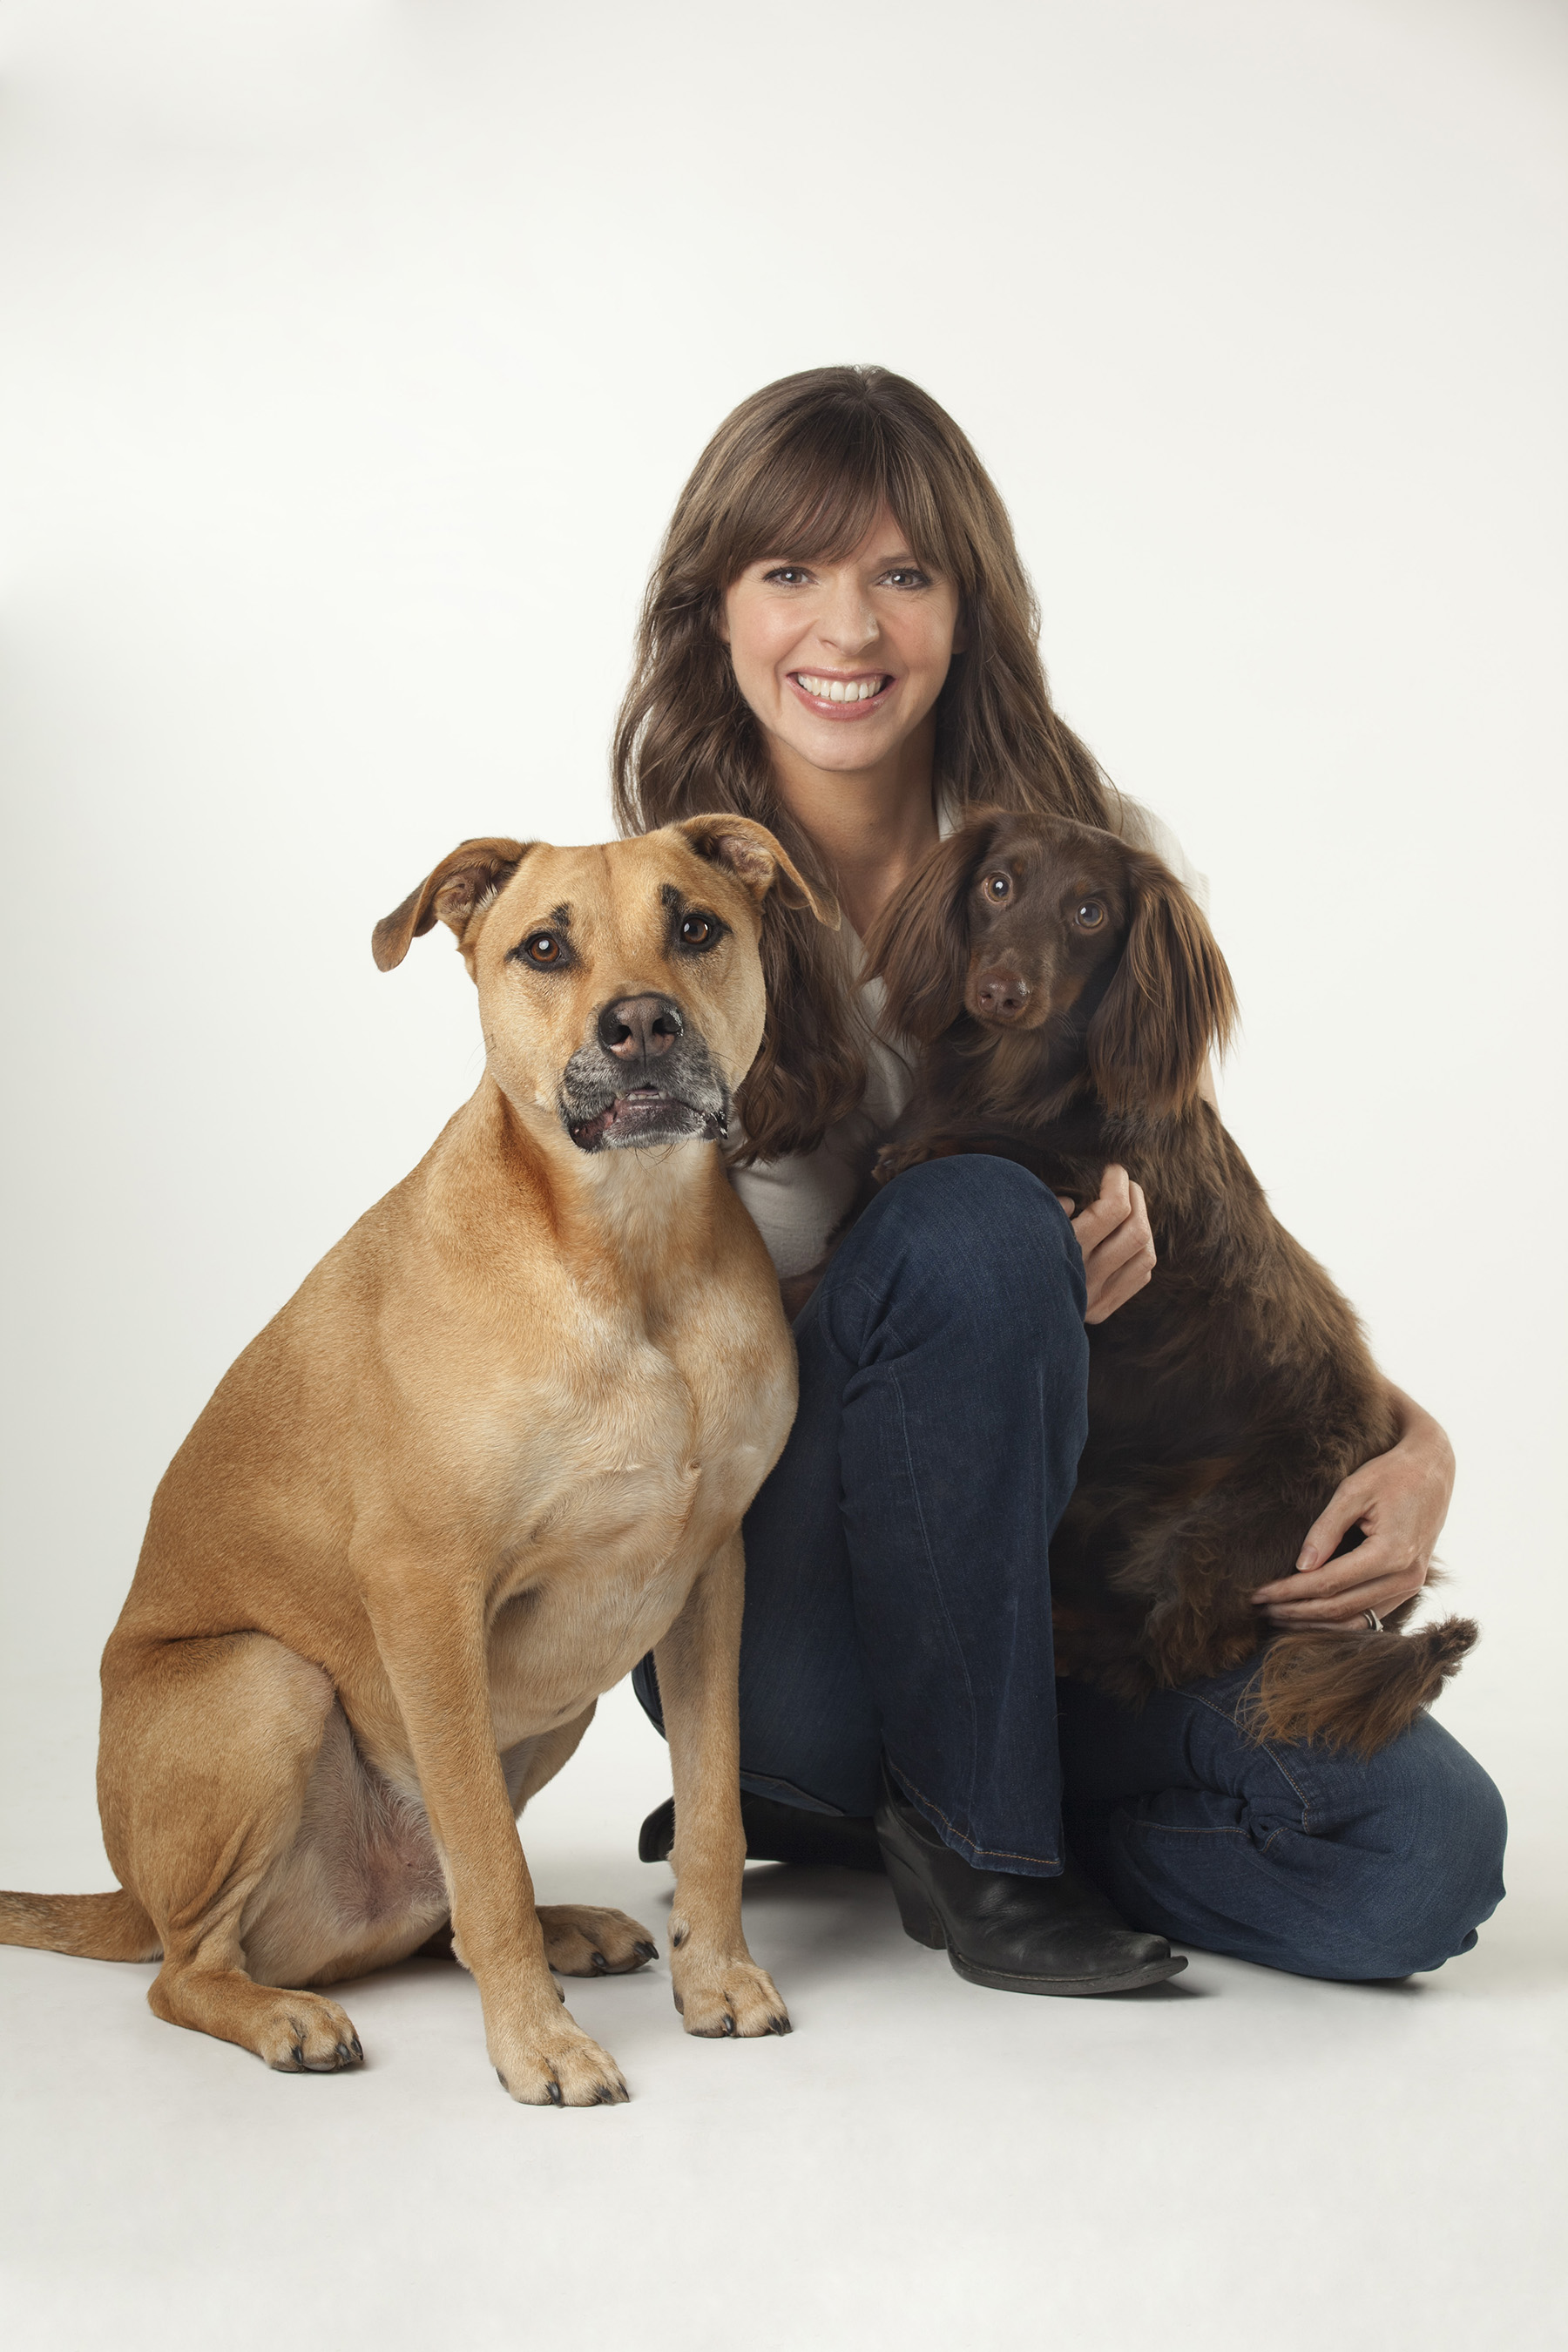 Internationally-renowned dog trainer Victoria Stilwell has partnered with State Farm educate dog owners about responsible dog ownership and dog bite prevention